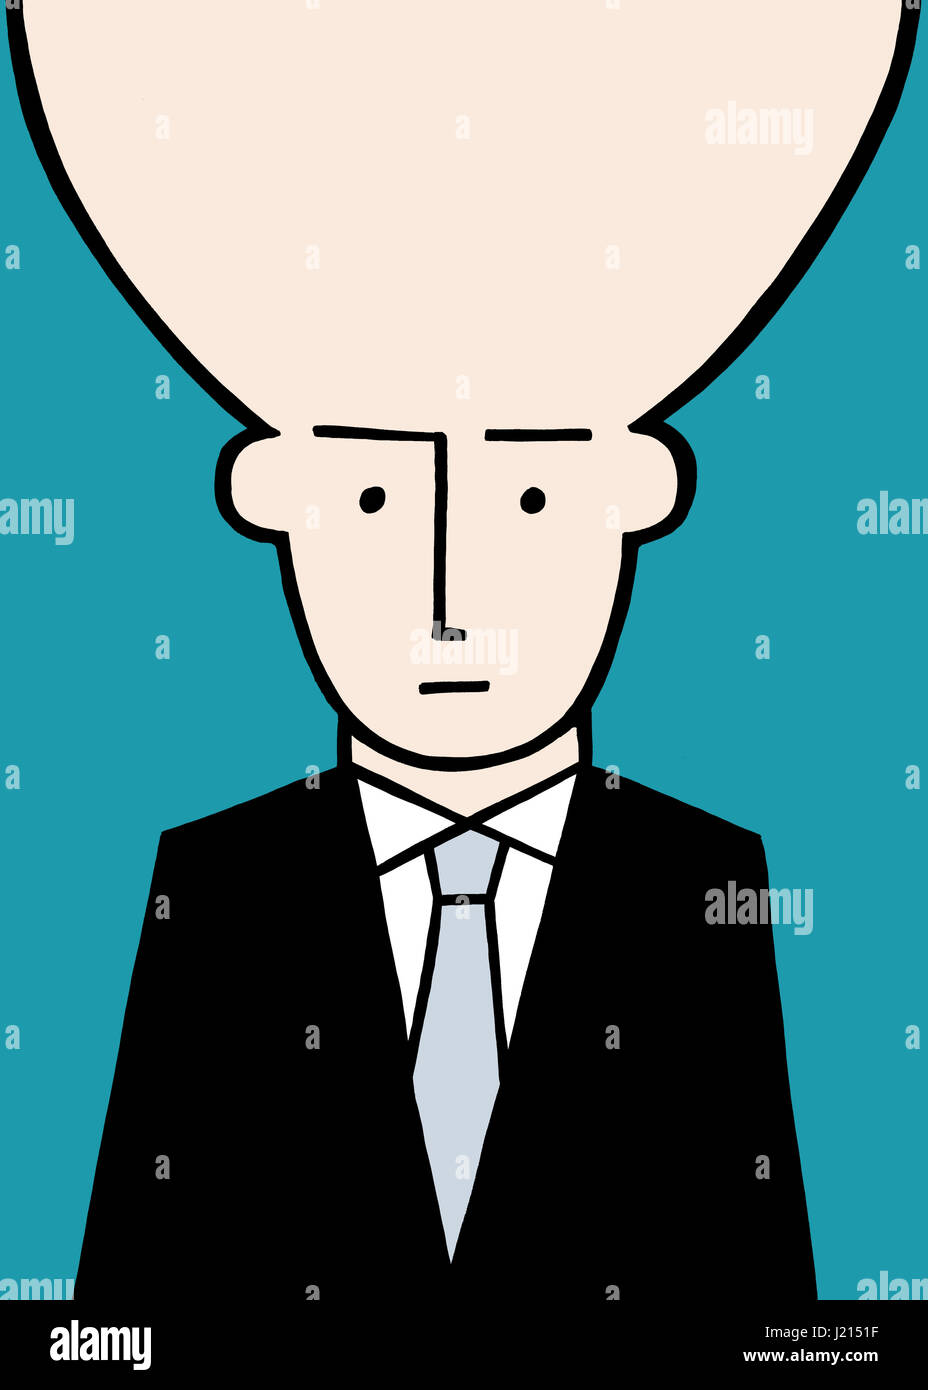 So much more going on up there. A business illustration about thinking different thoughts. Stock Photo